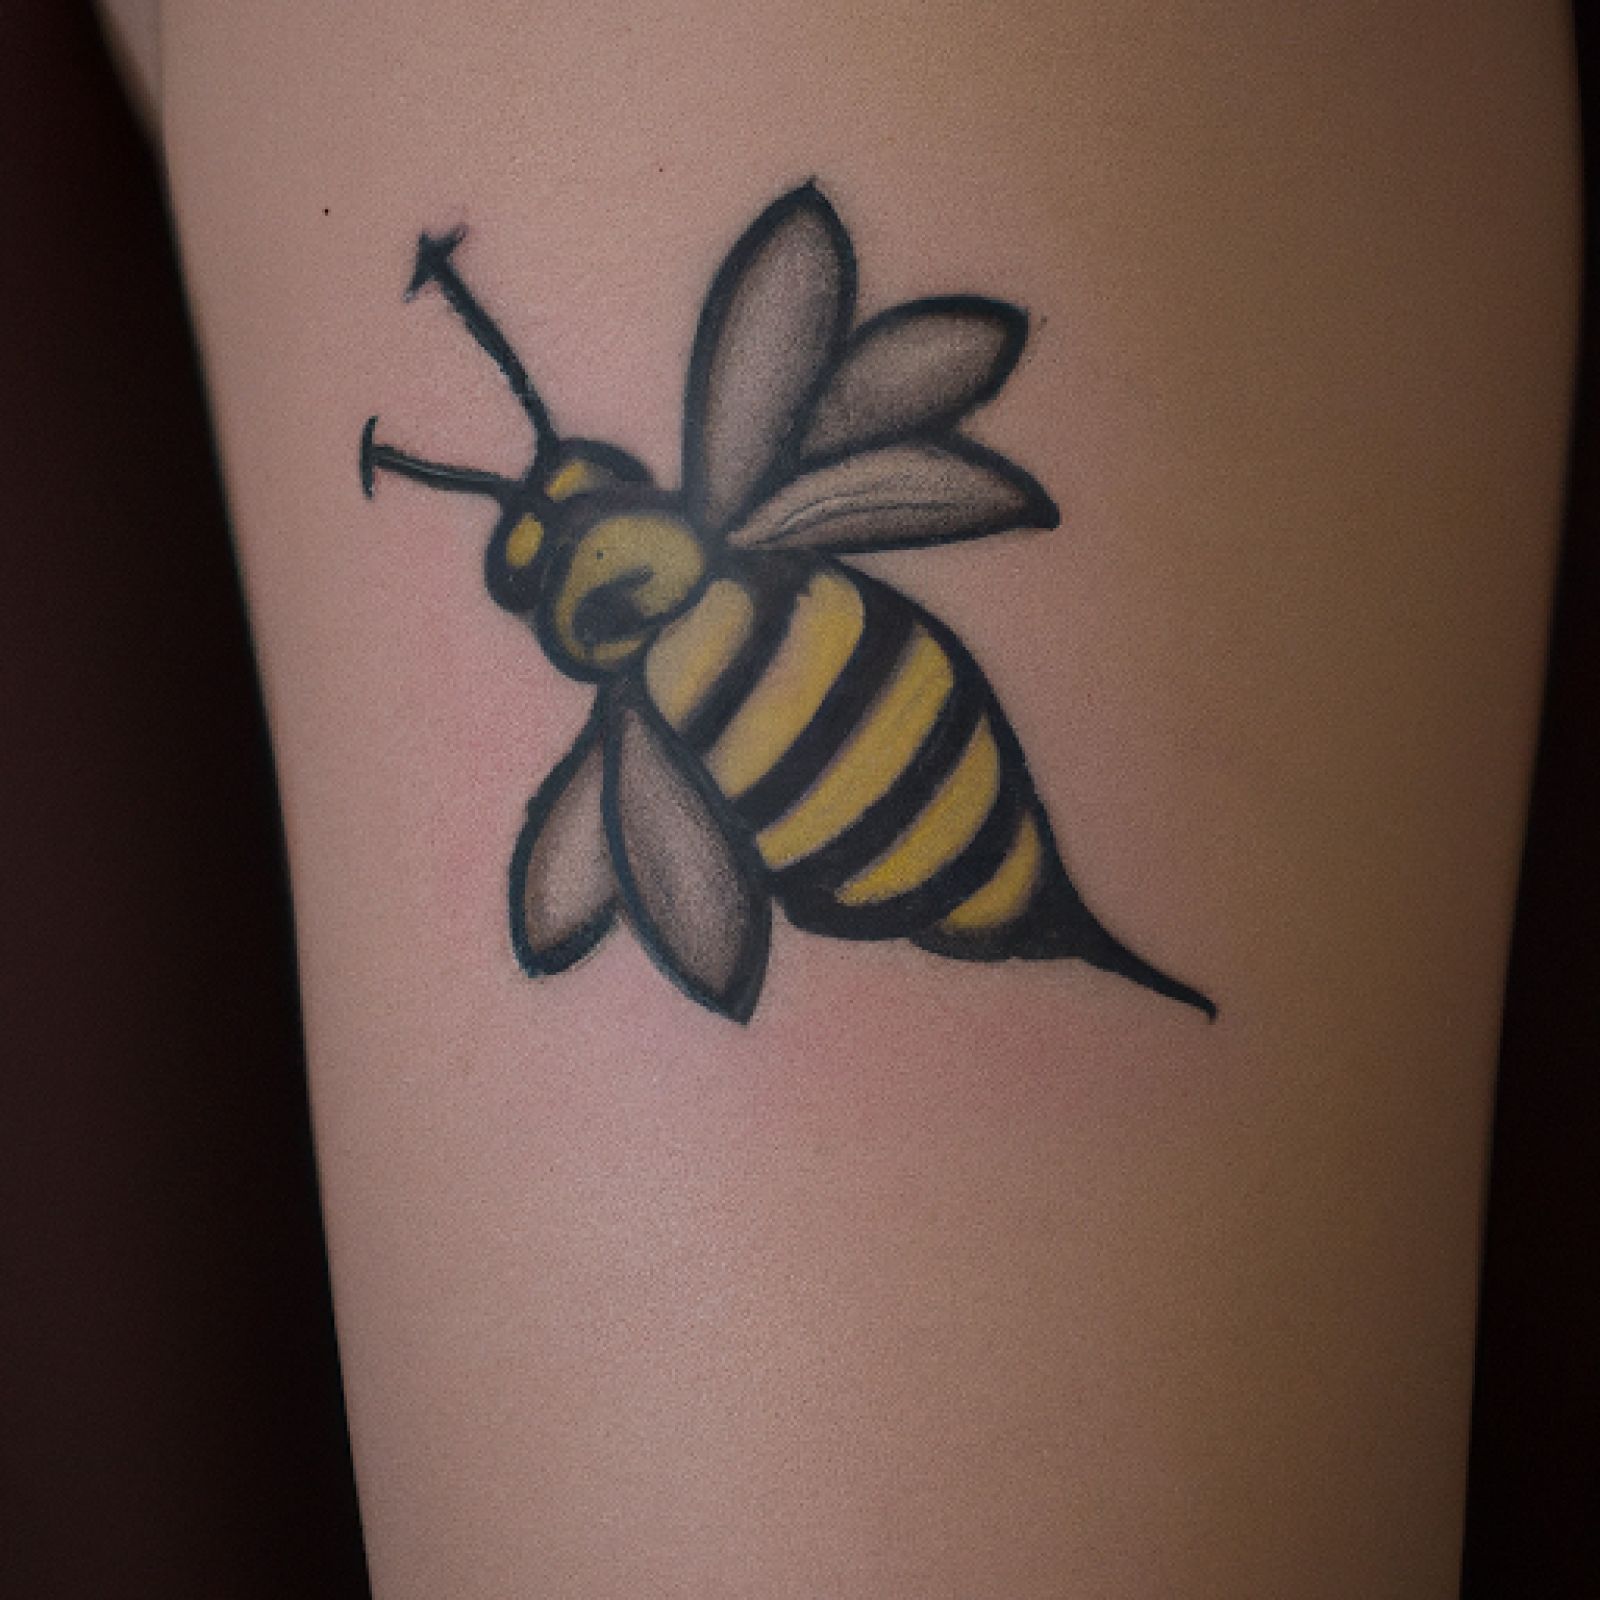 Bee tattoo on calf for women